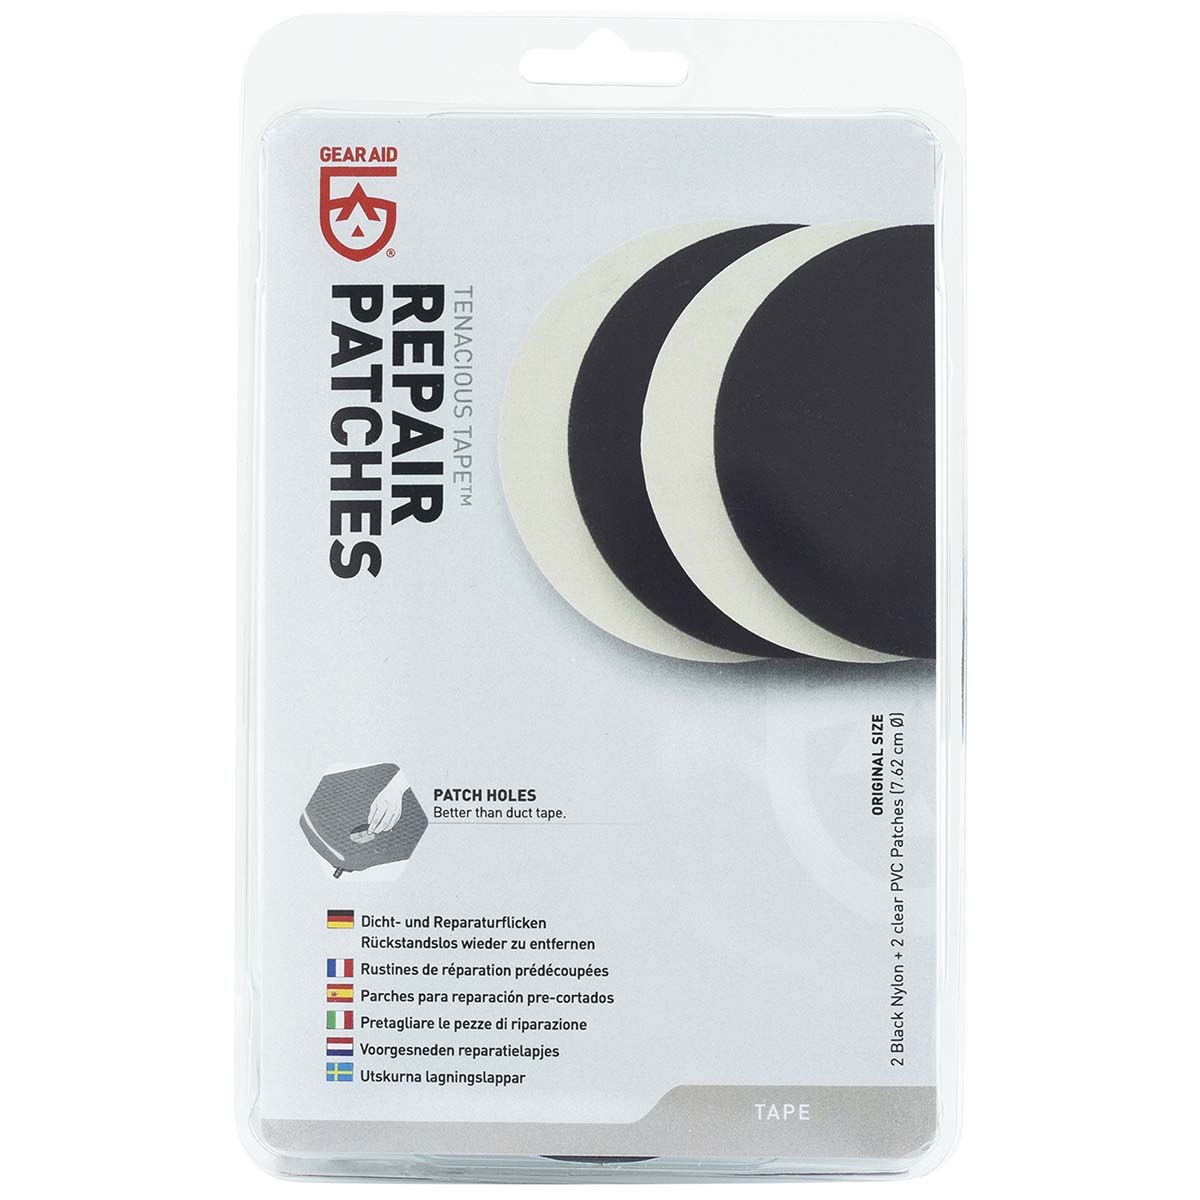 5713058 A set of 4 repair patches. Suitable for repairing holes and cracks in tents, tarps, inflatable items, sleeping bags, jackets, rain gear etc. This set contains 2 black nylon patches and 2 transparent PVC patches for virtually invisible repairs. Regardless of the weather, these repair patches remain intact and will not peel off or come loose due to sun or rain.